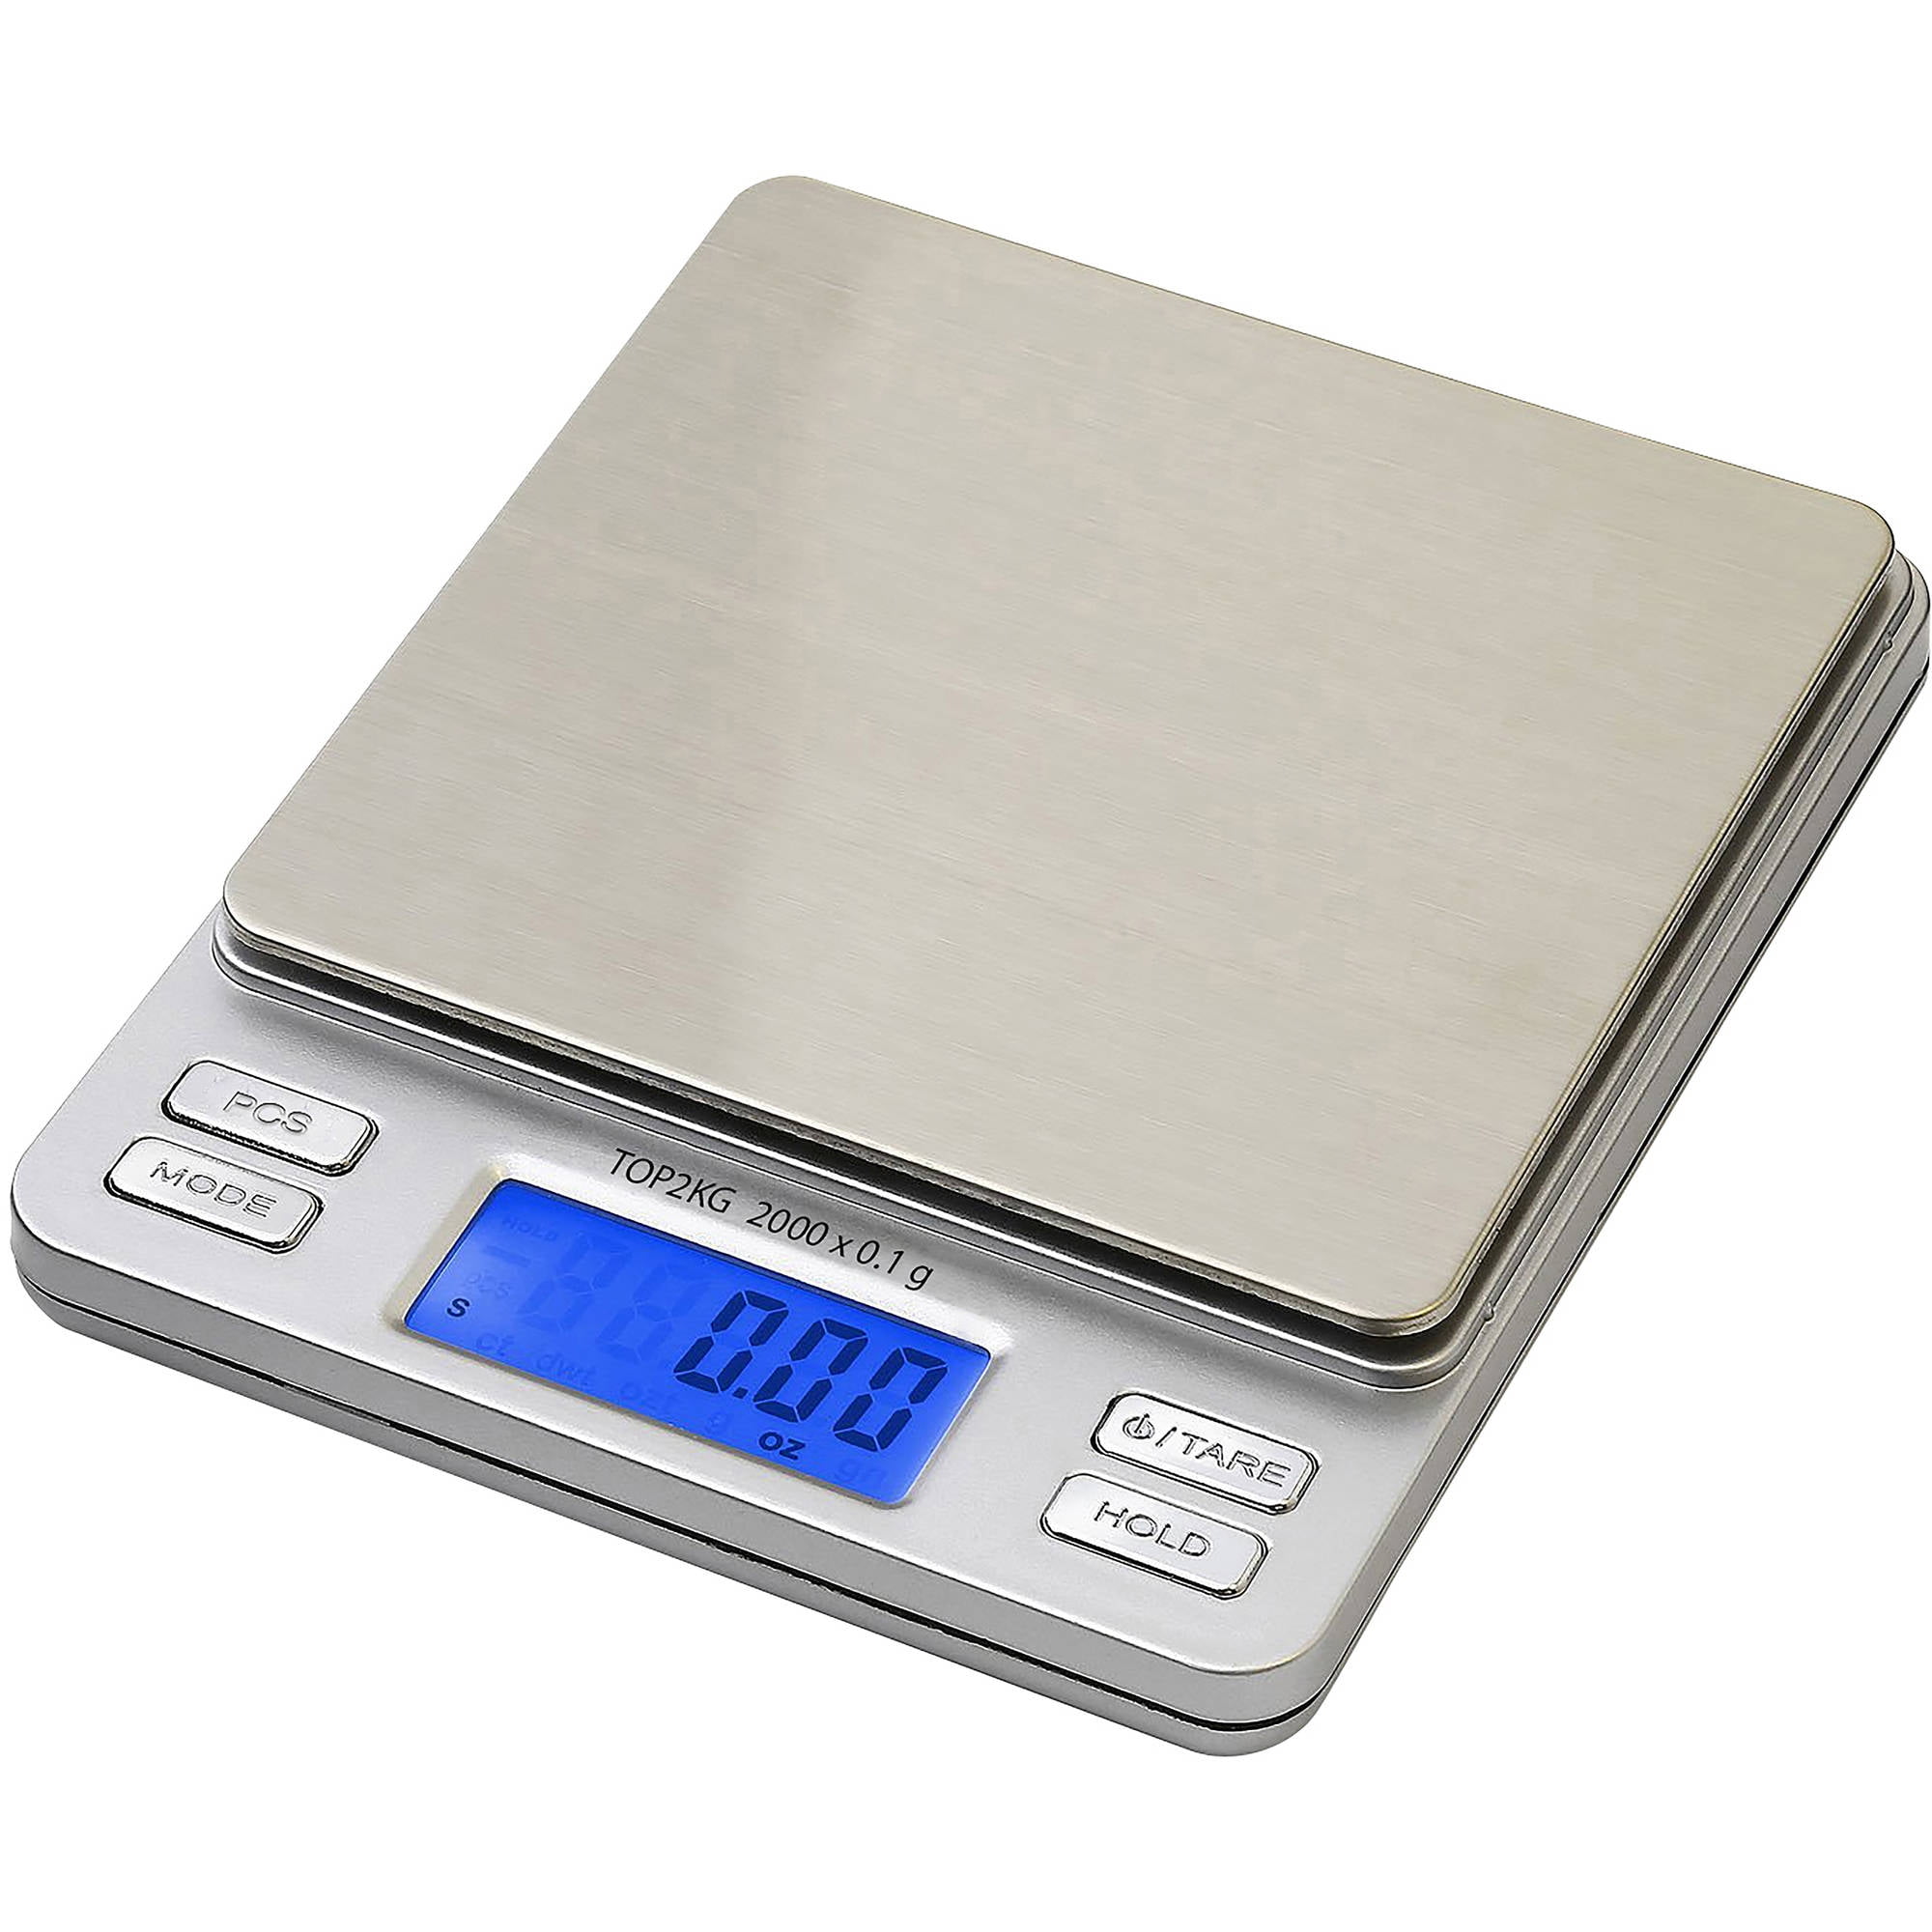  Series Digital Pocket Weight Scale, Lightweight, Accurate  Measurement 1kg x 0.1g, (Silver), AWS-1KG-SIL - AMERICAN WEIGH SCALES:  Digital Kitchen Scales: Home & Kitchen